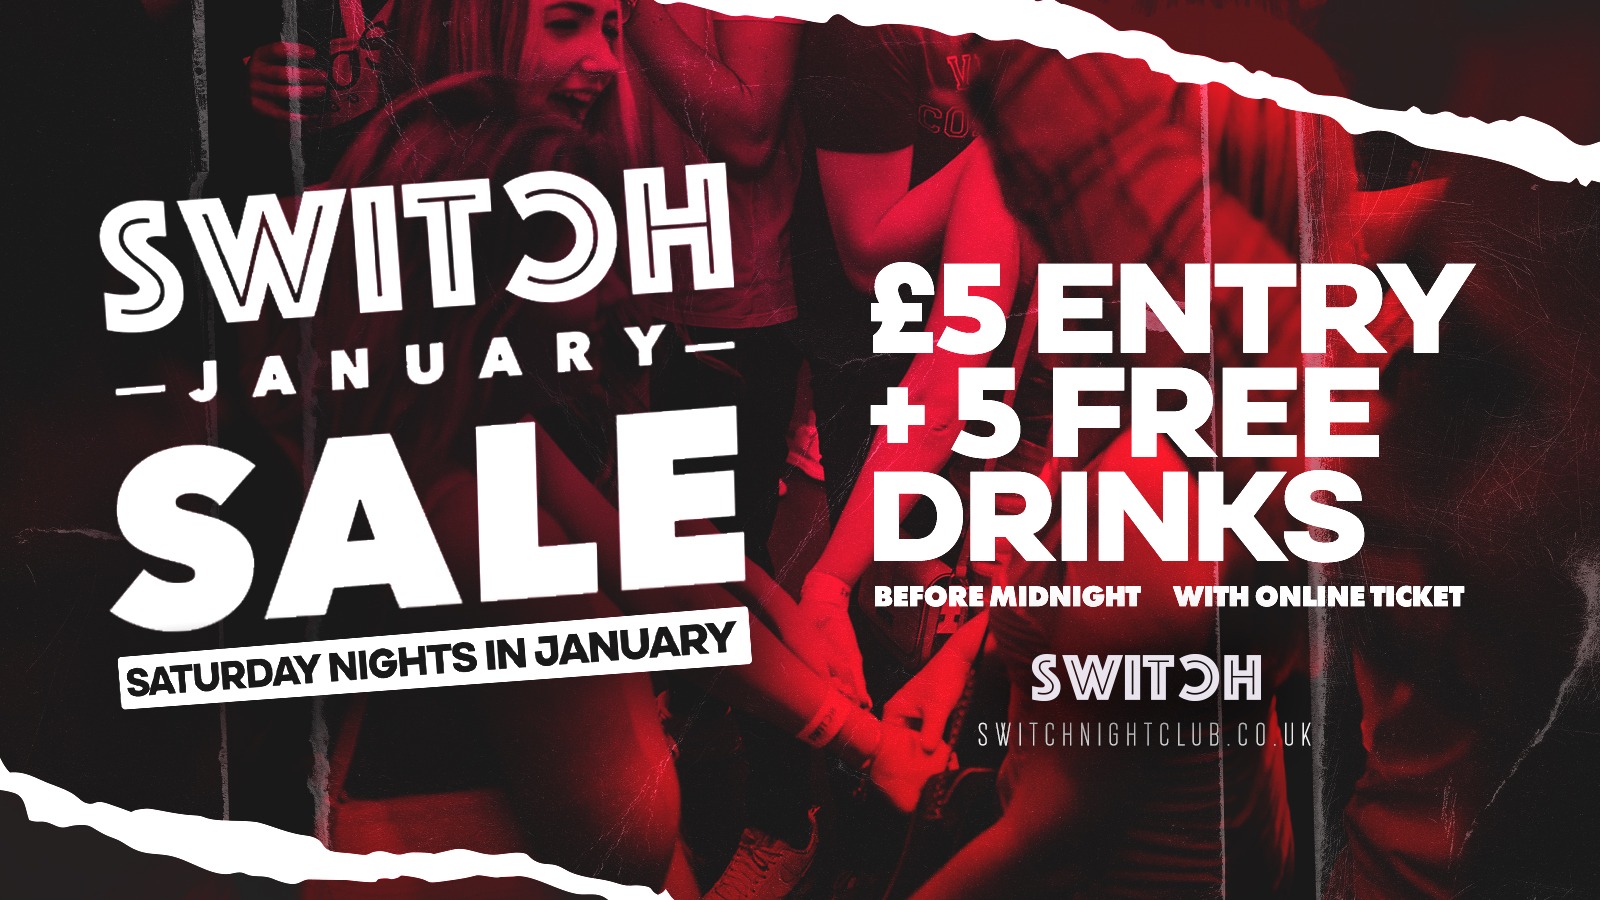 Switch January Sale (£5 Entry / 5 x Free Drinks) | Valid B4 Midnight